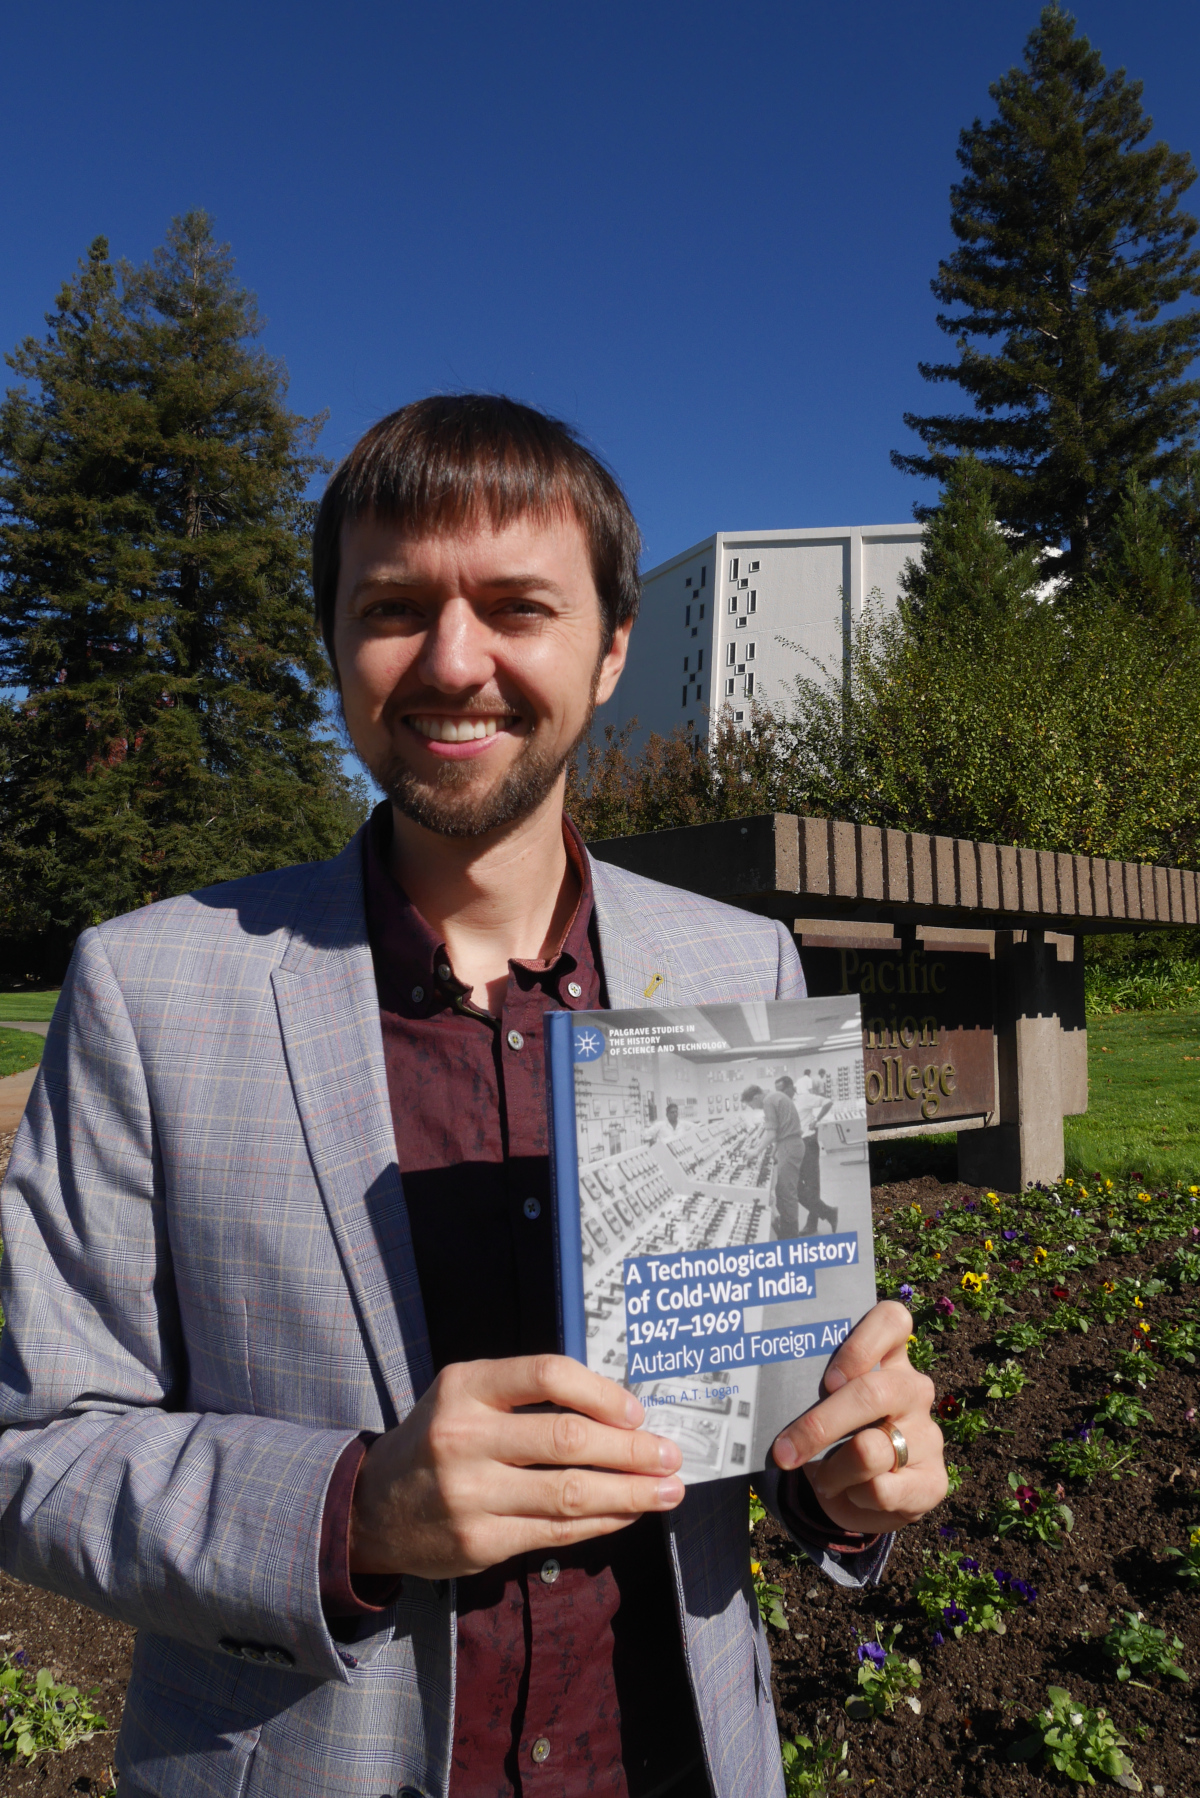 Your blogger (and published author!) with his newly-published book.